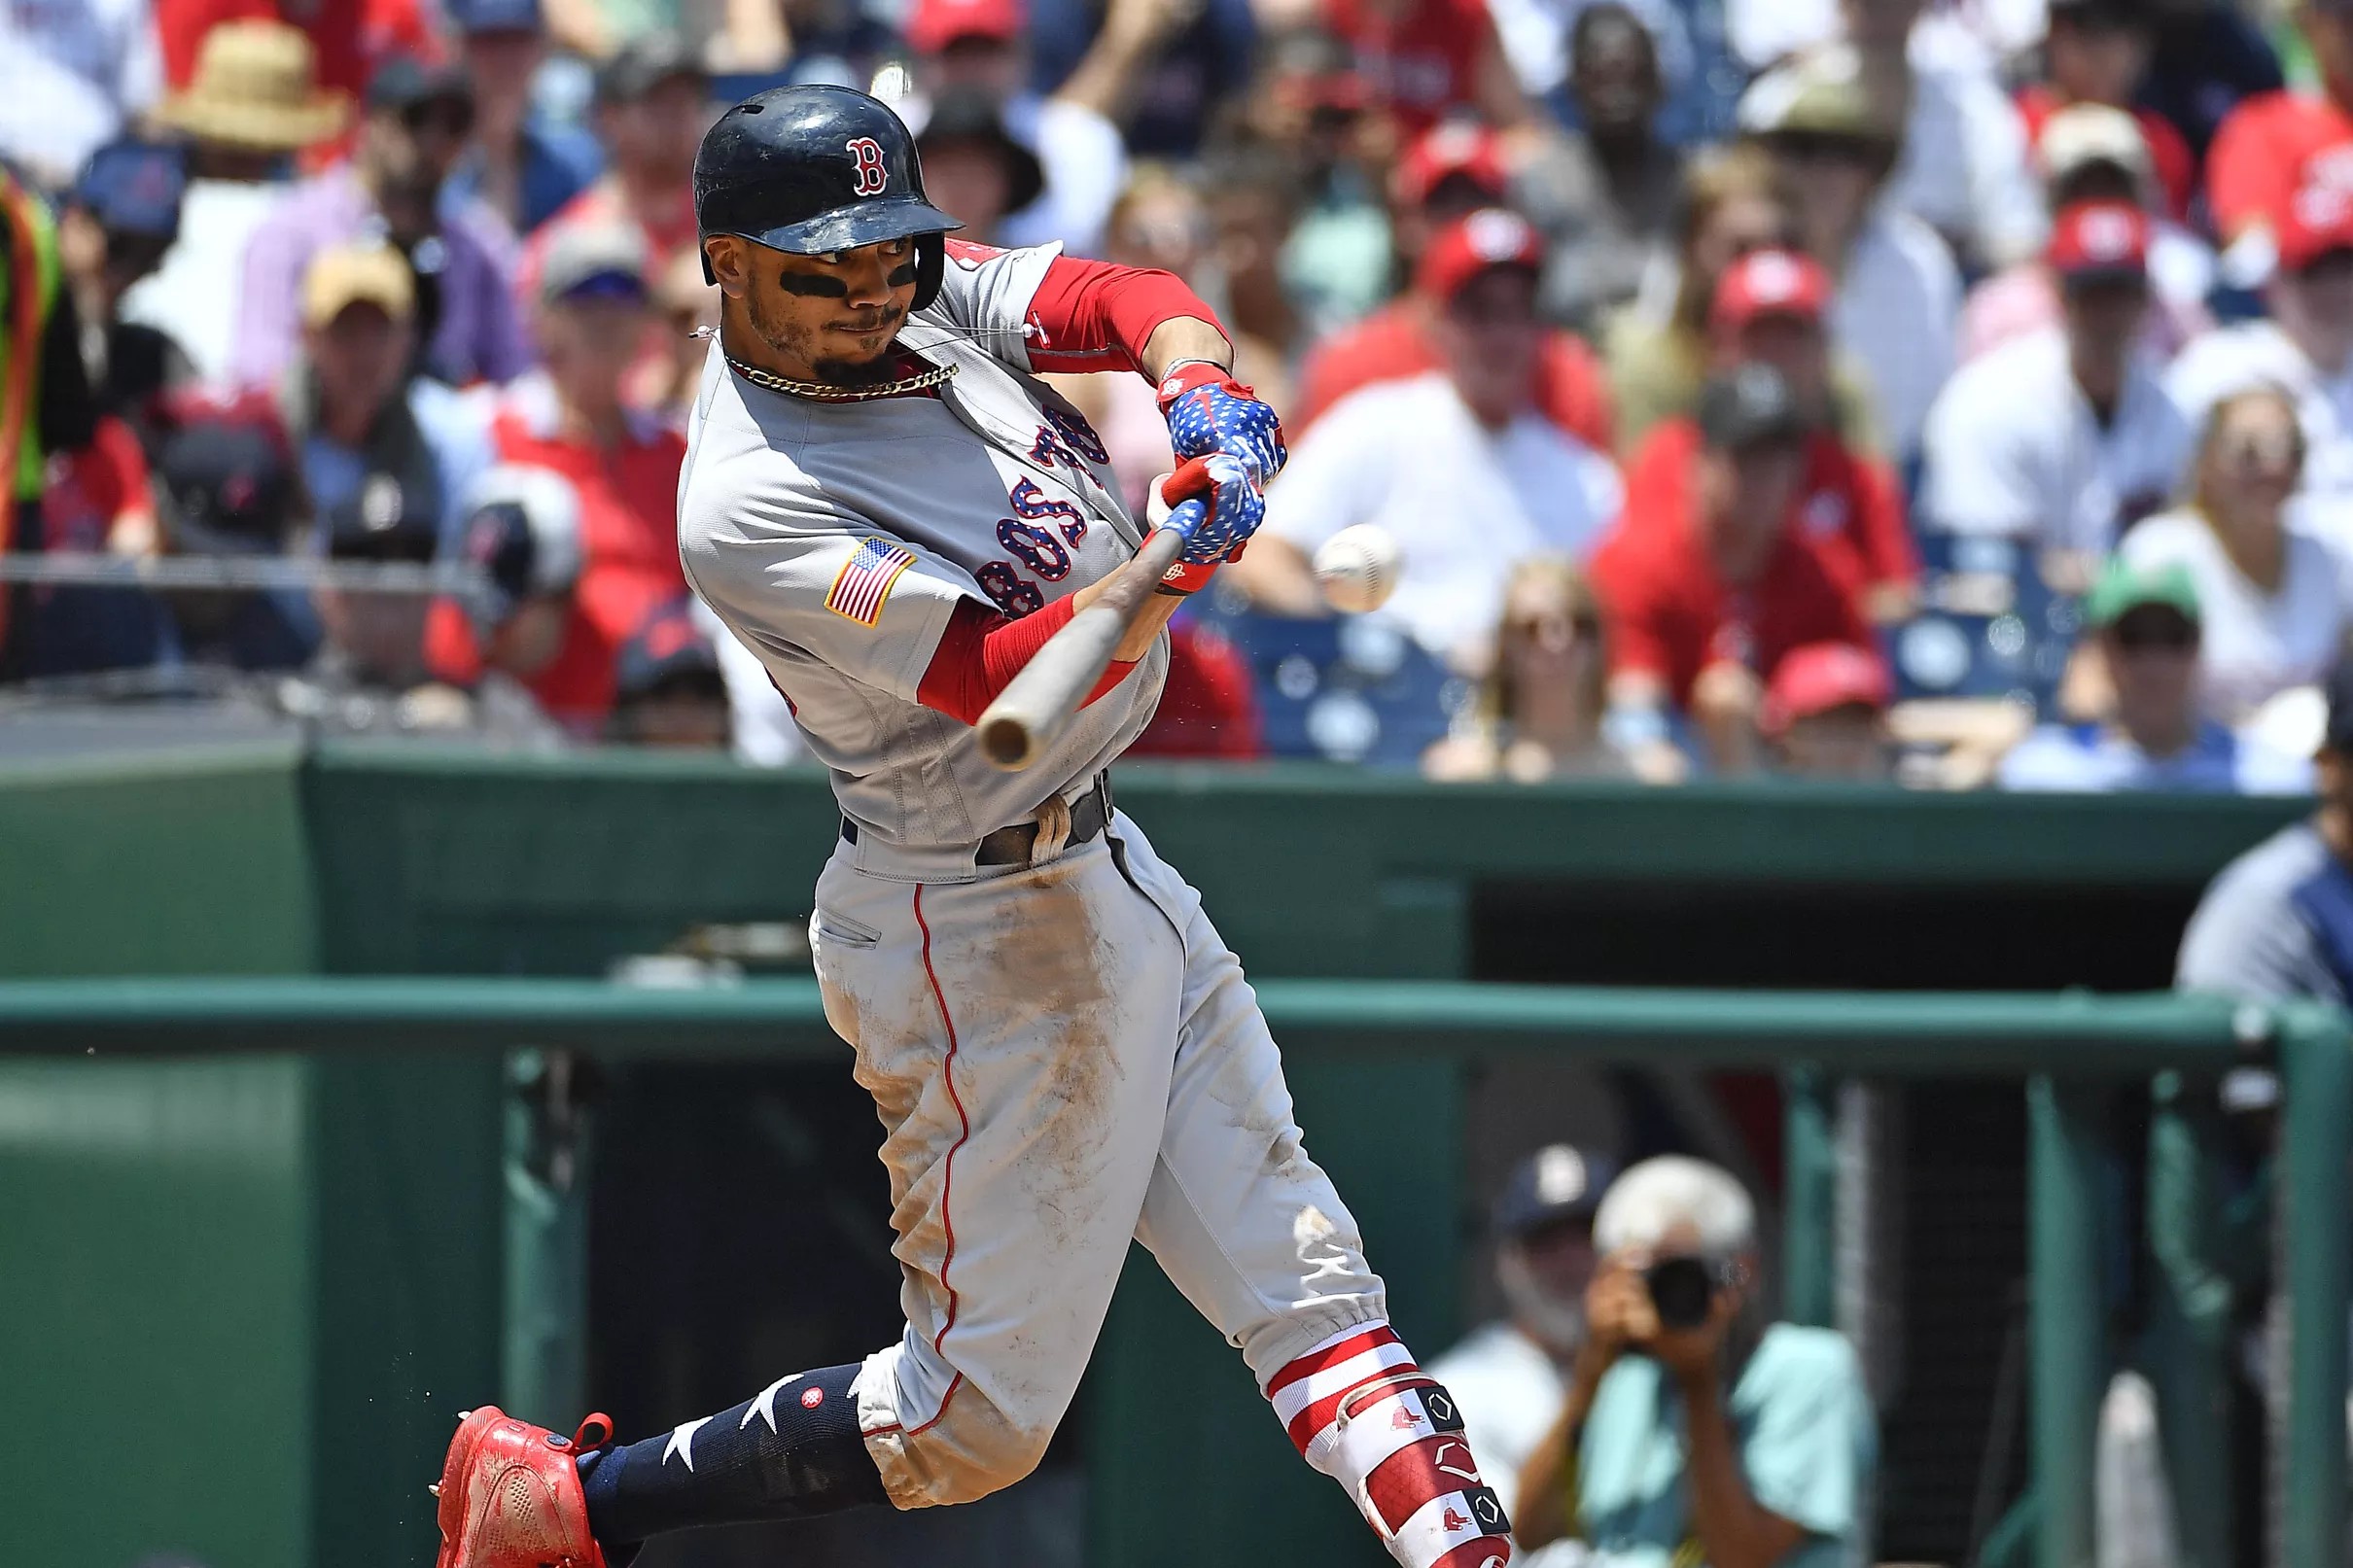 Boston Red Sox series preview: Let the bloodbath commence